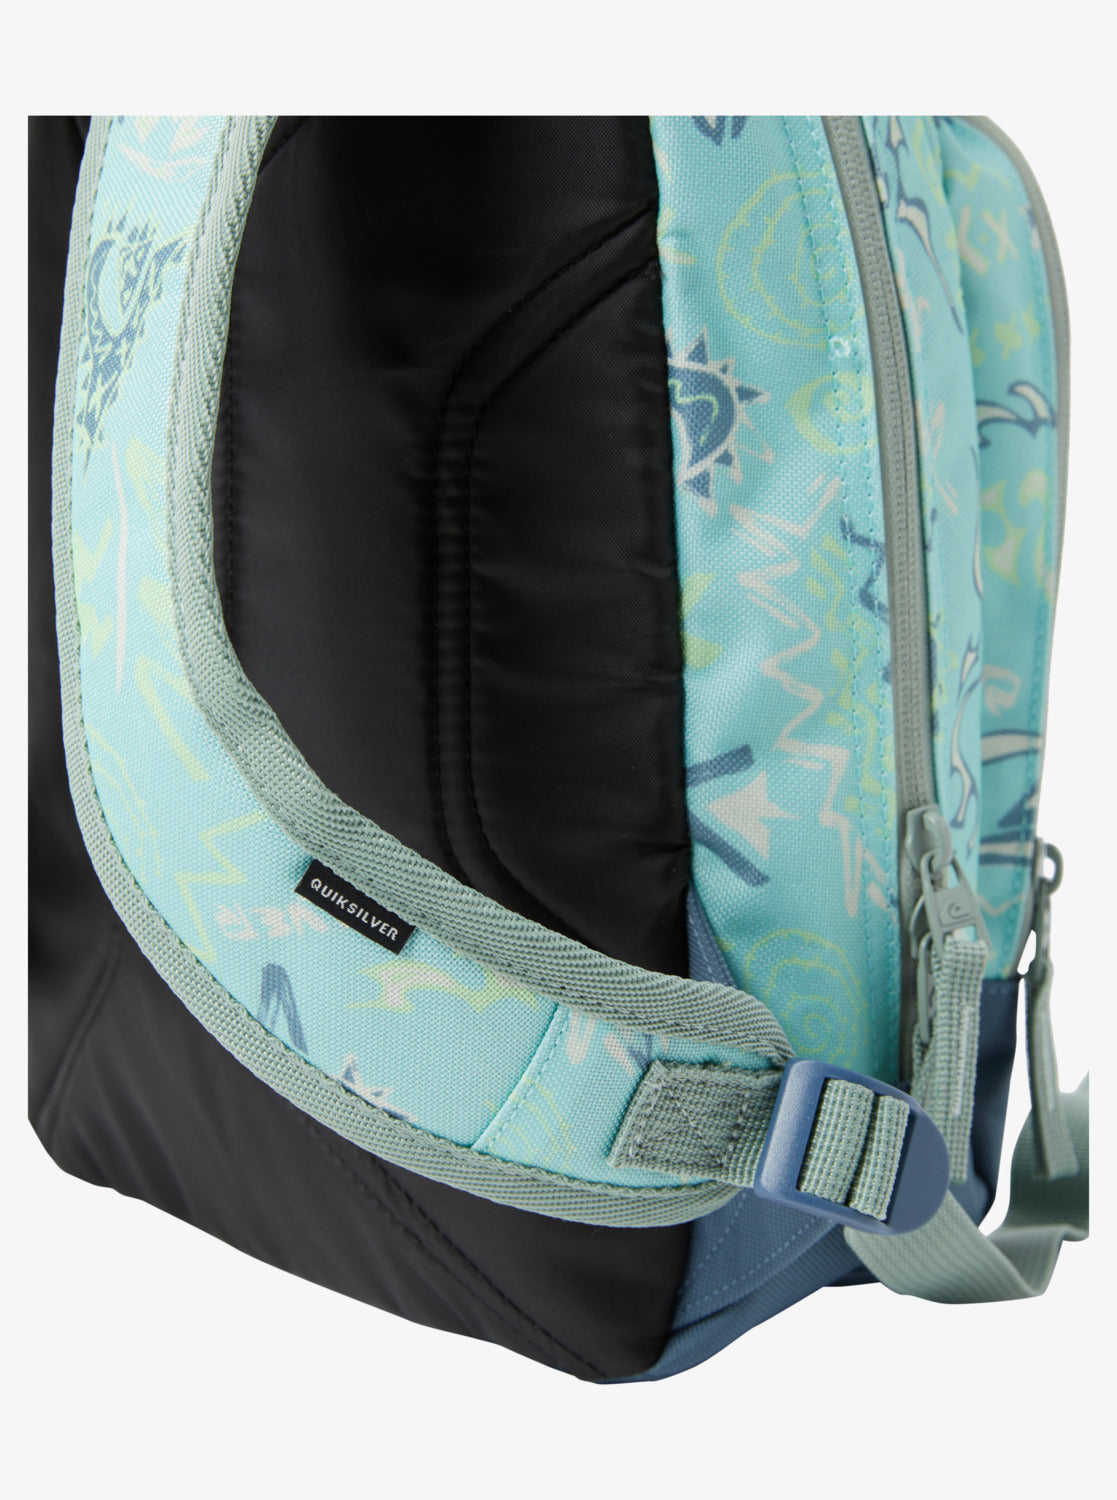 QUIKSILVER Chomping 12 L - Small Backpack for Boys 2-7